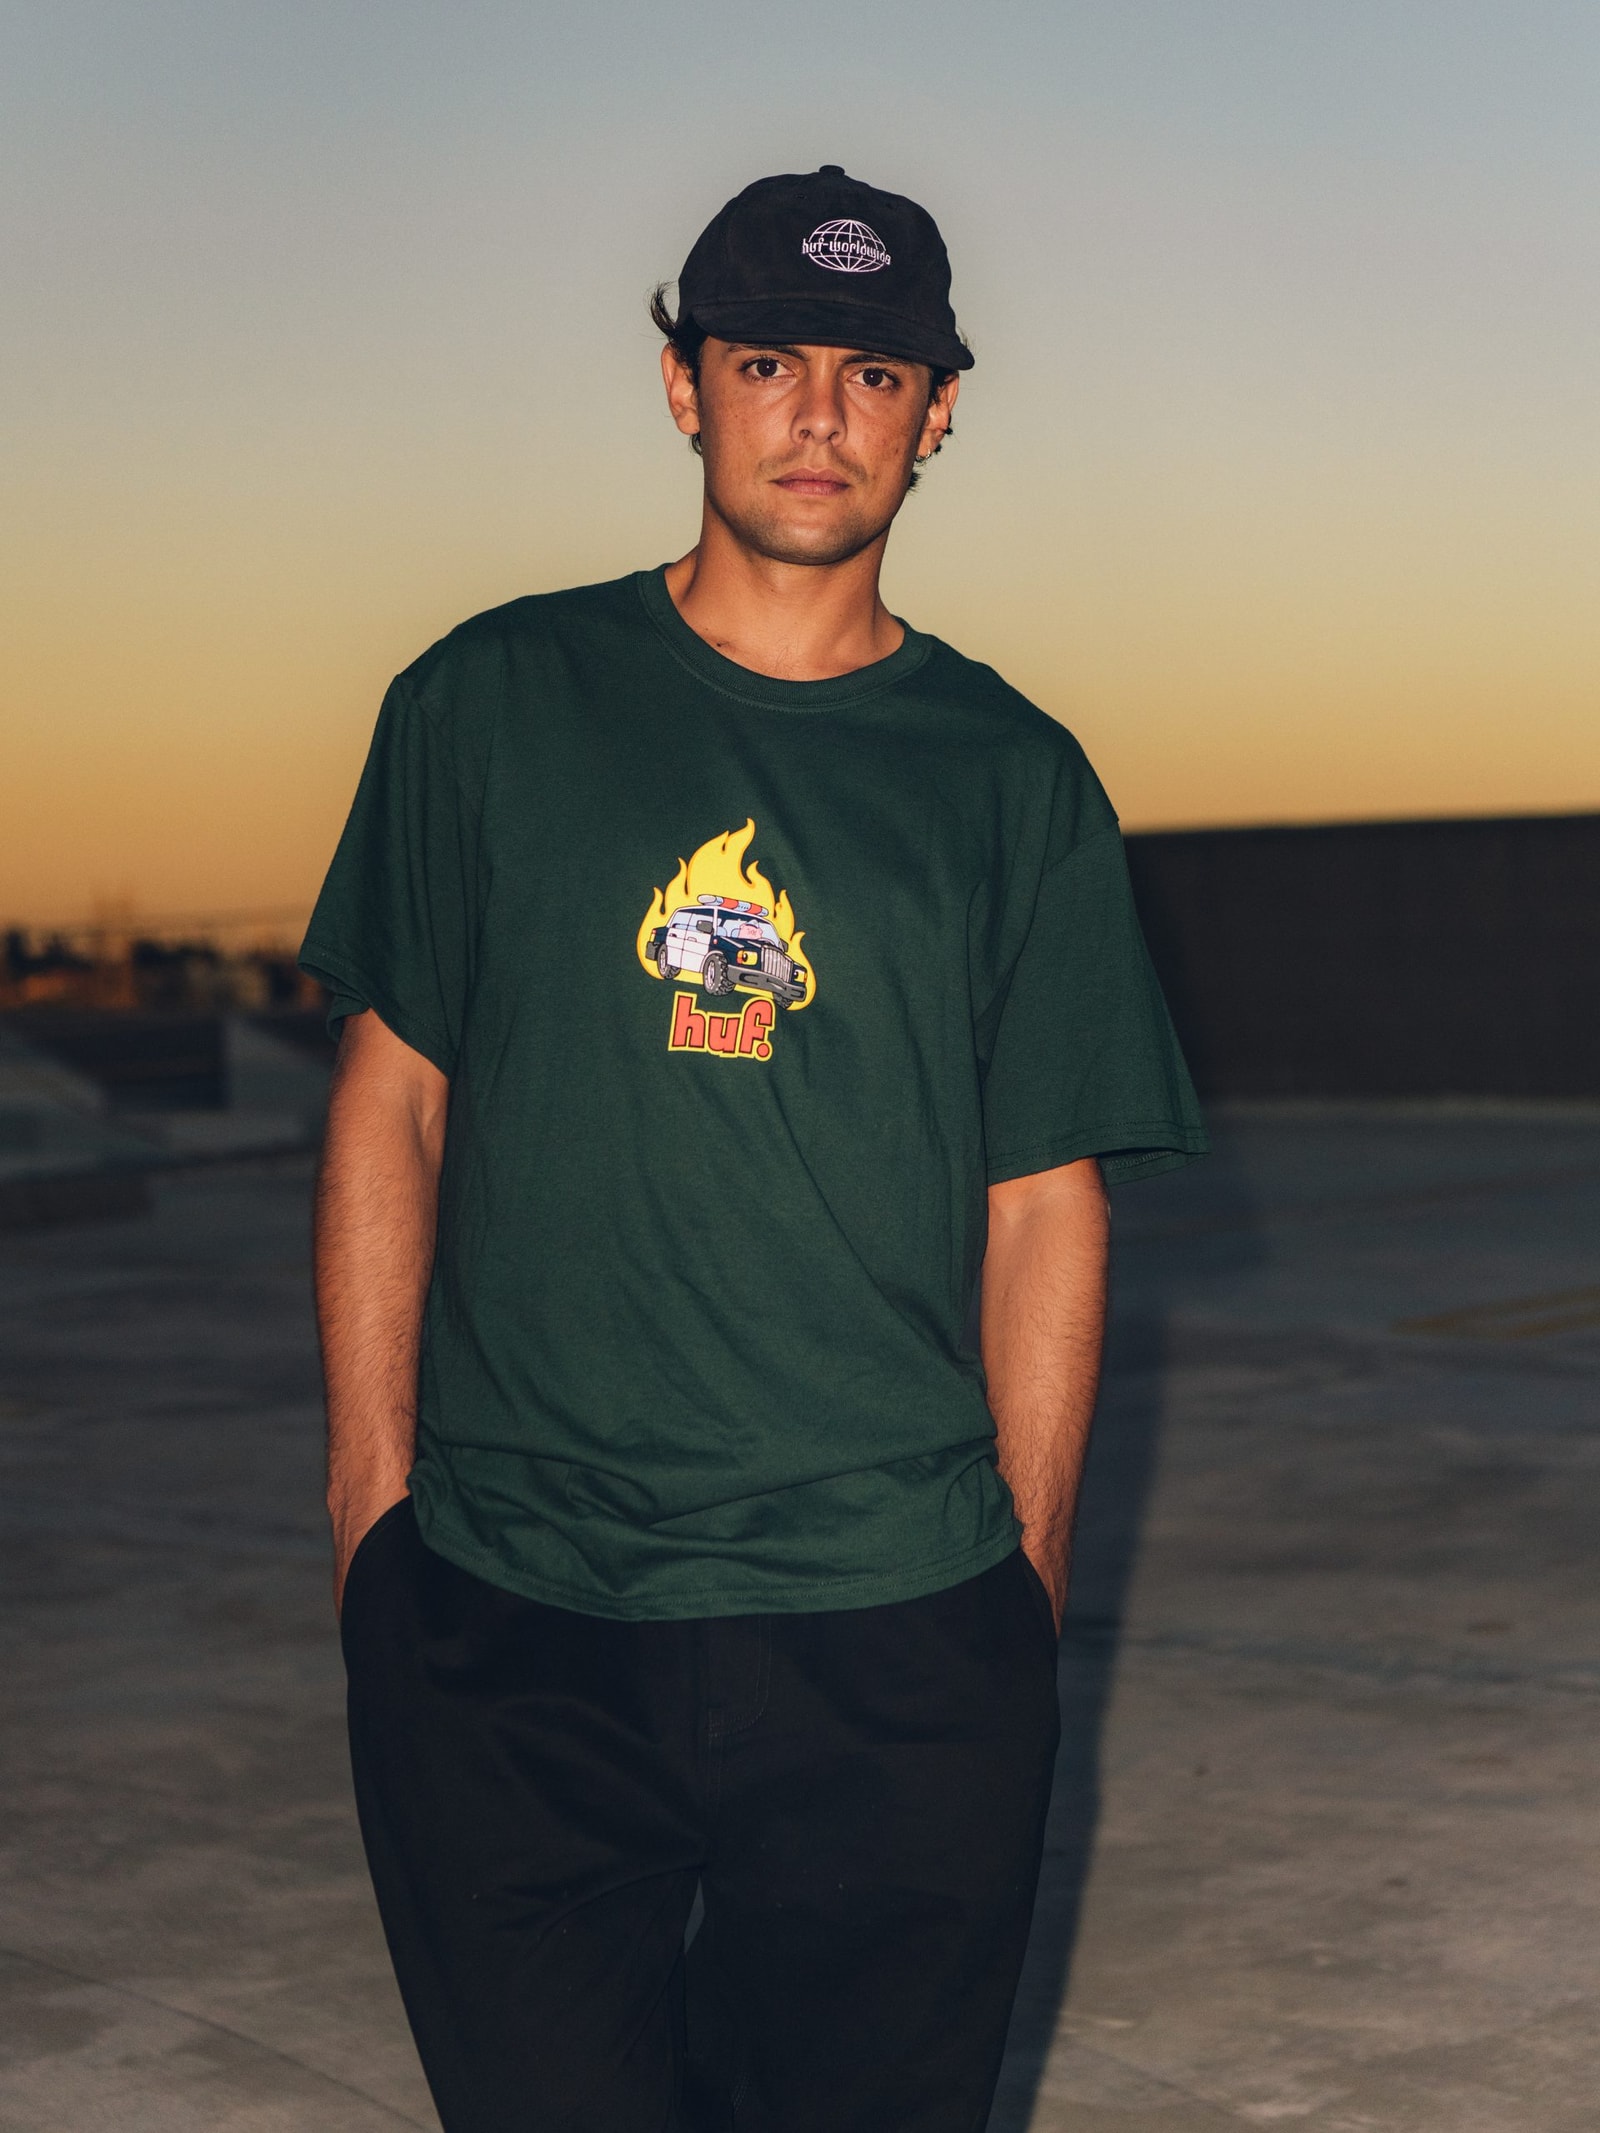 Huf Worldwide Is Making Night Moves With Fall Apparel Drop